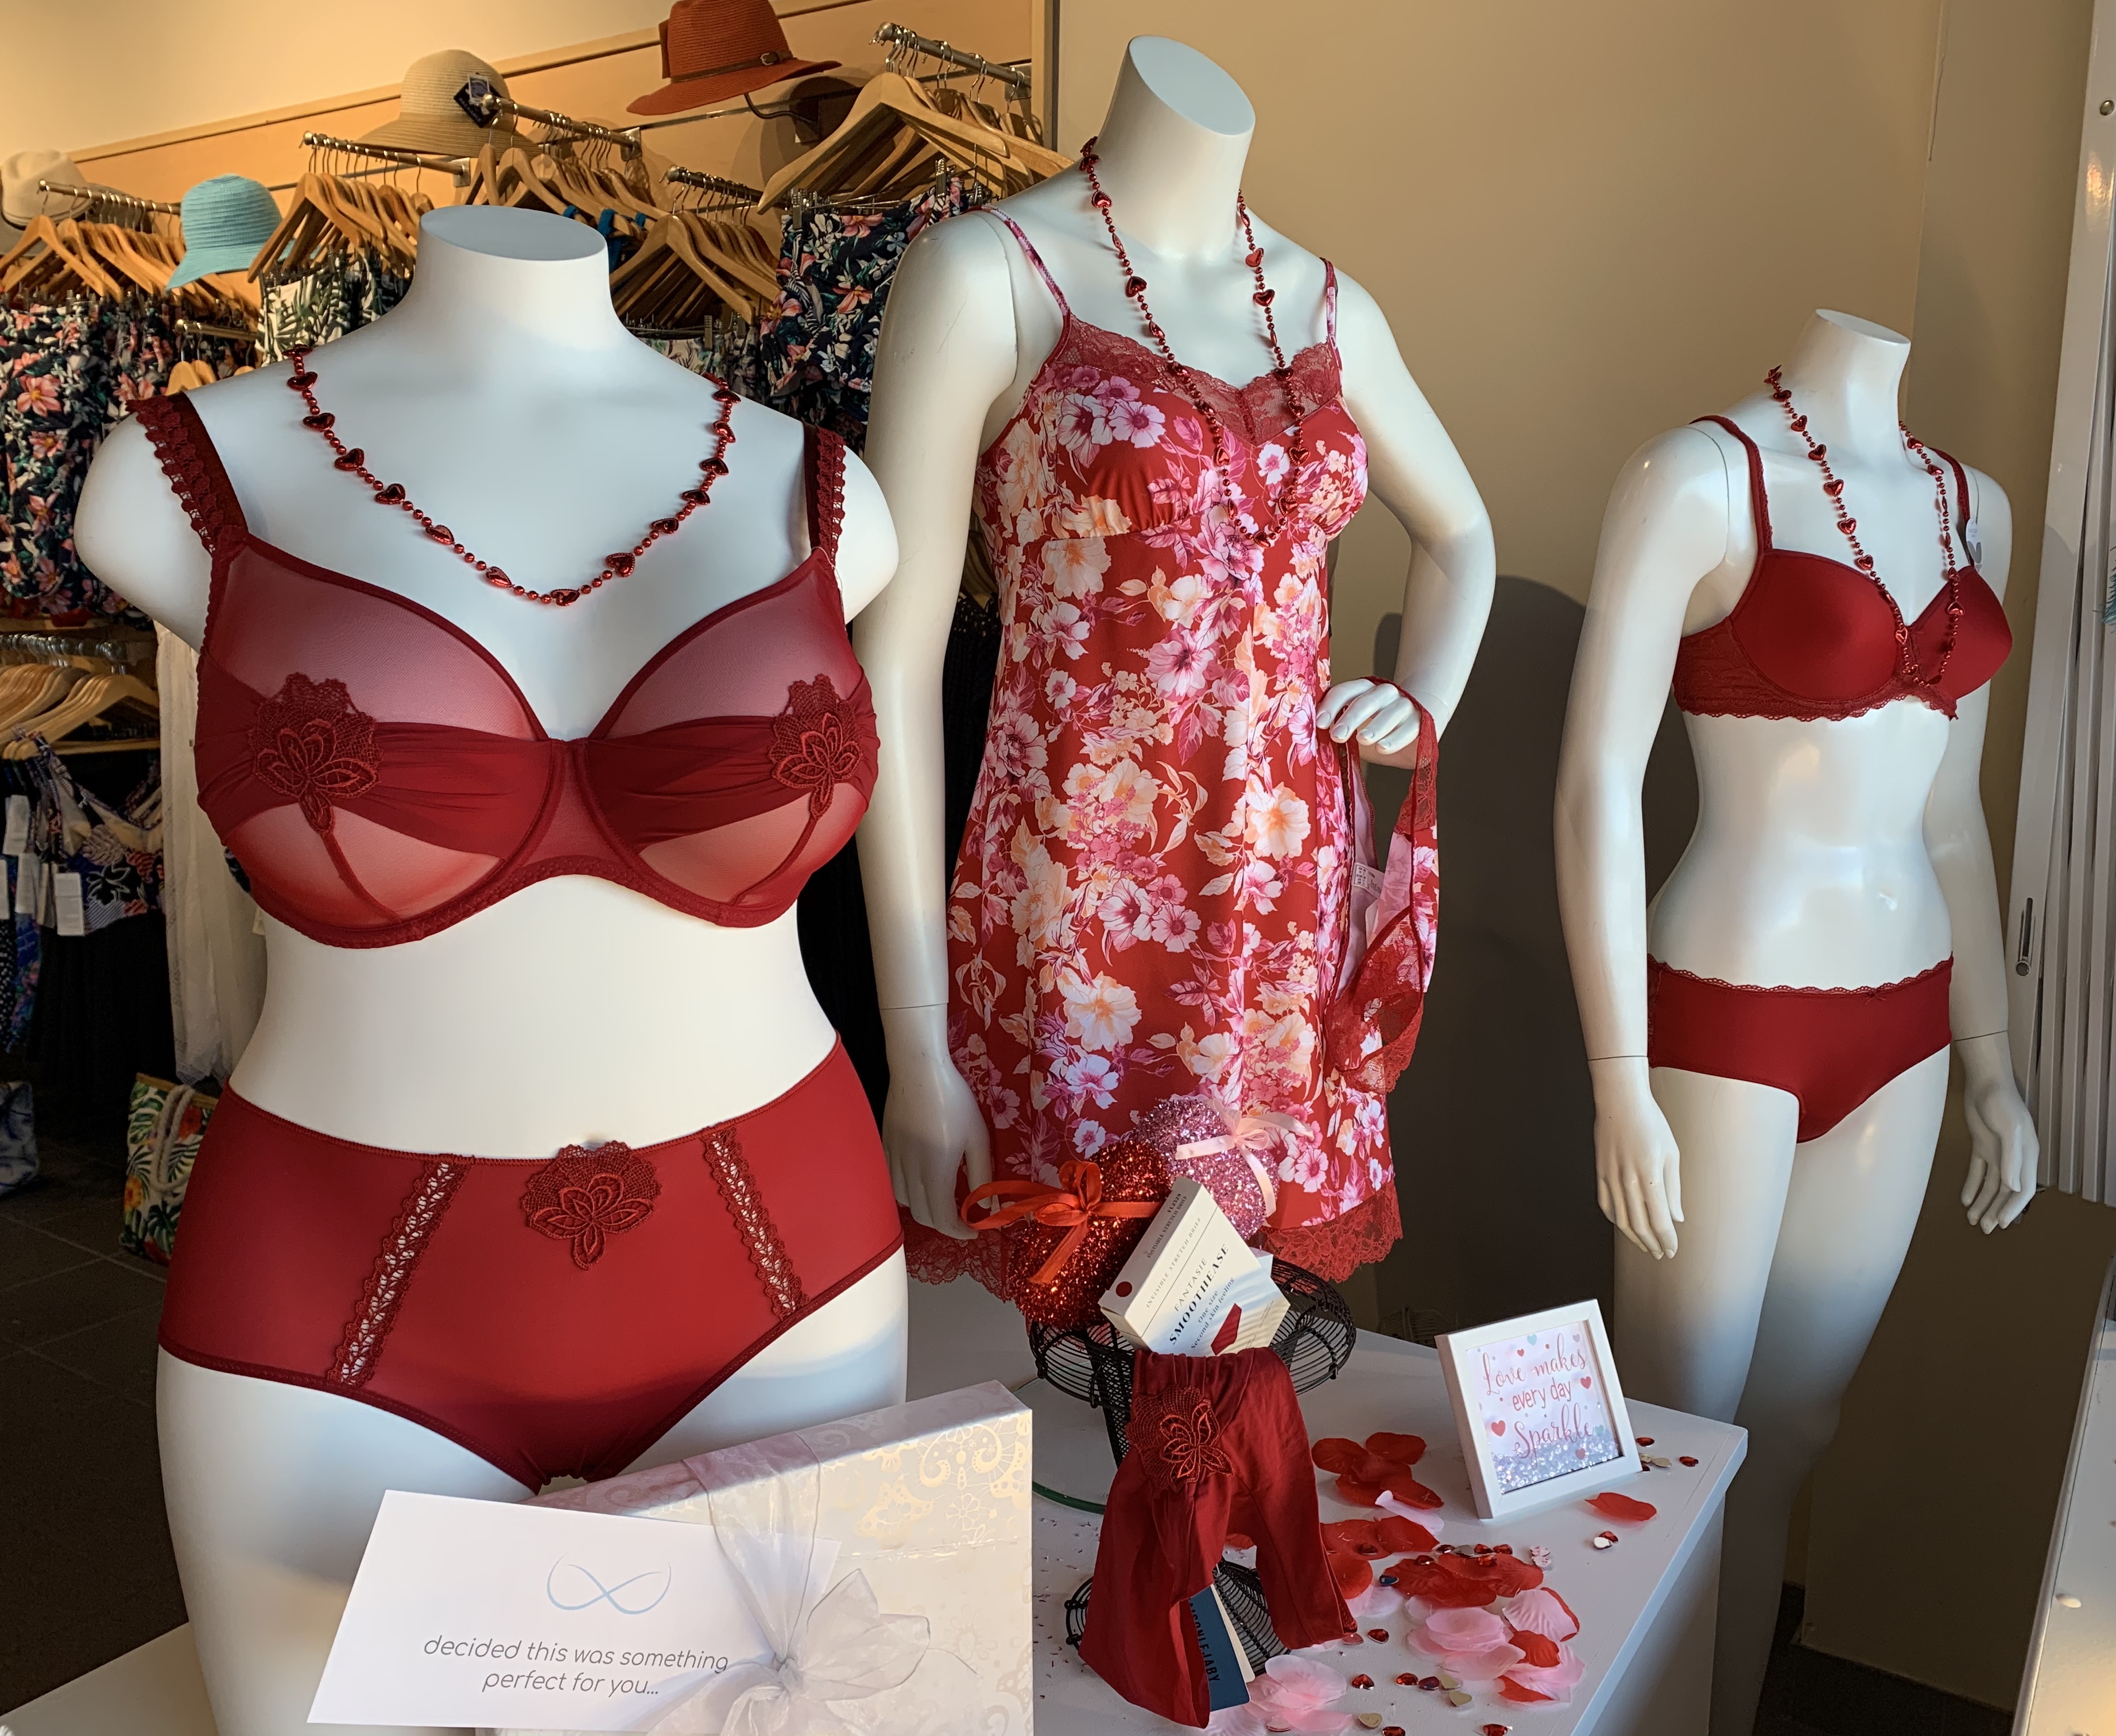 Time for our annual Spring Bra Sale! - The Lingerie Loft